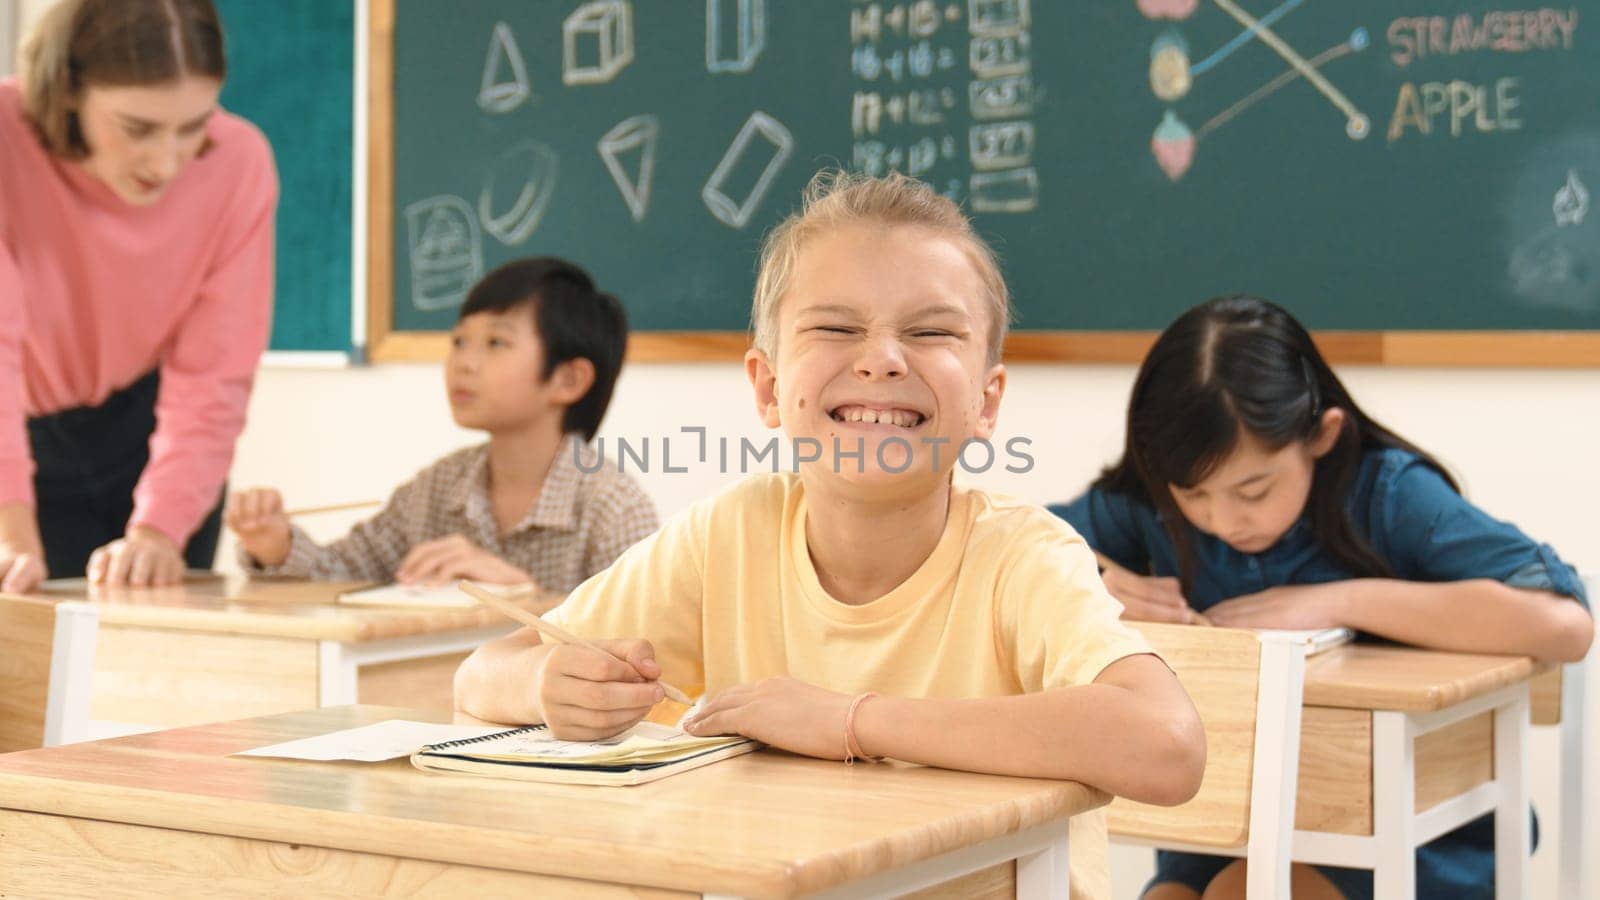 Caucasian smart child smiling at camera while doing classwork at classroom while happy multicultural student doing test or writing note in classroom at elementary class. Education concept. Pedagogy.